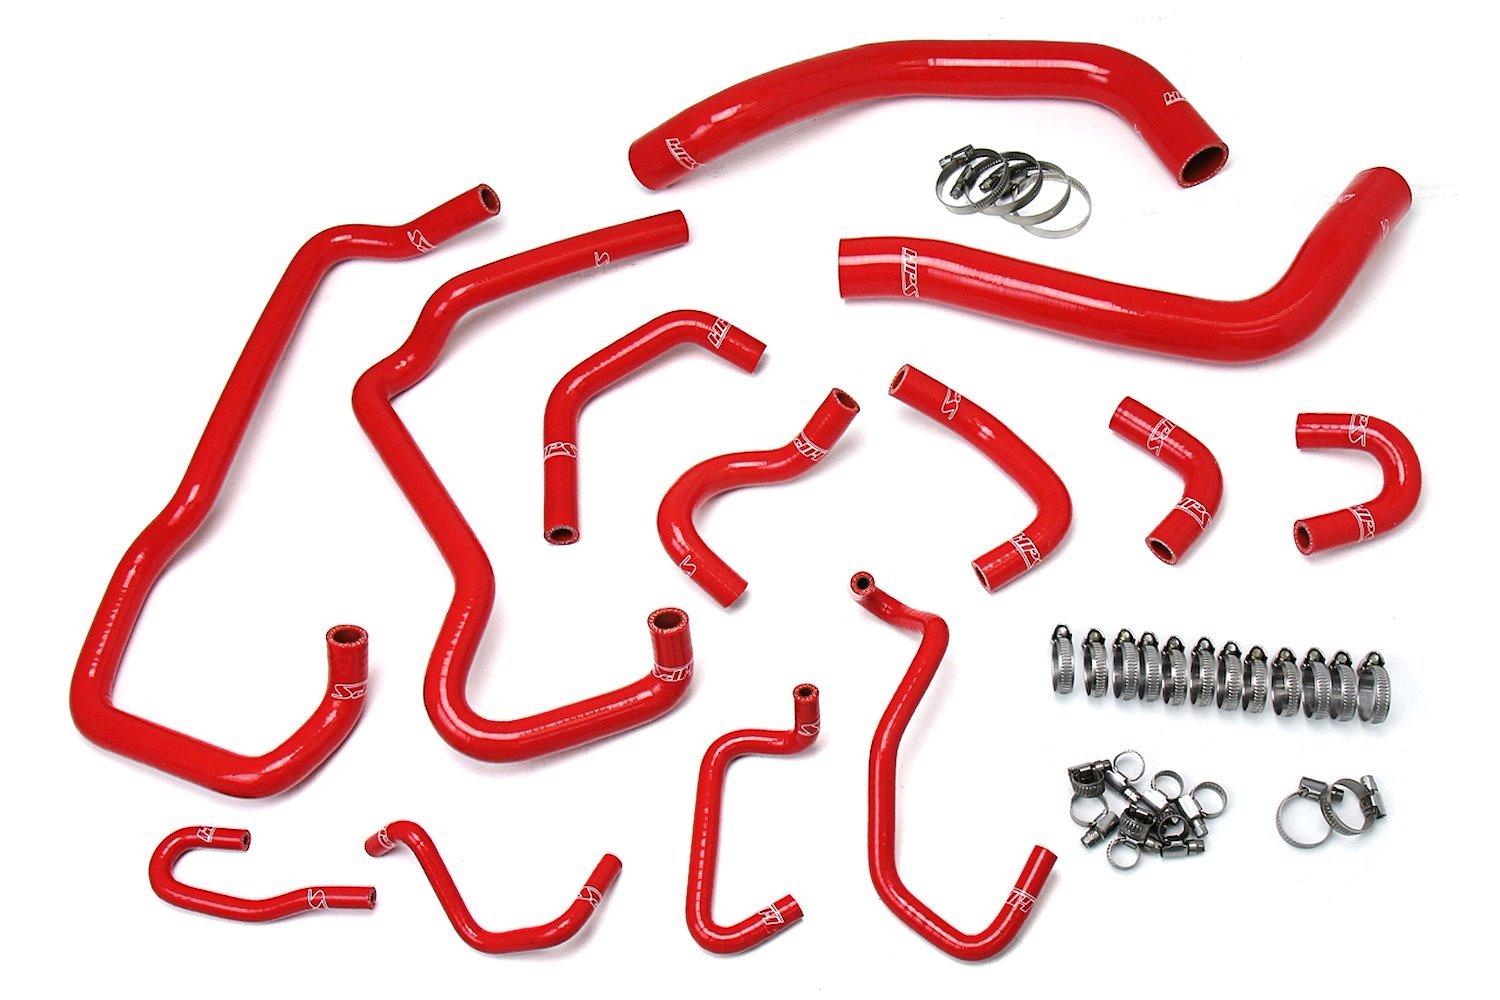 57-1581-RED Coolant Hose Kit, High-Temp 3-Ply Reinforced Silicone, Replace Rubber Radiator Heater Coolant Hoses